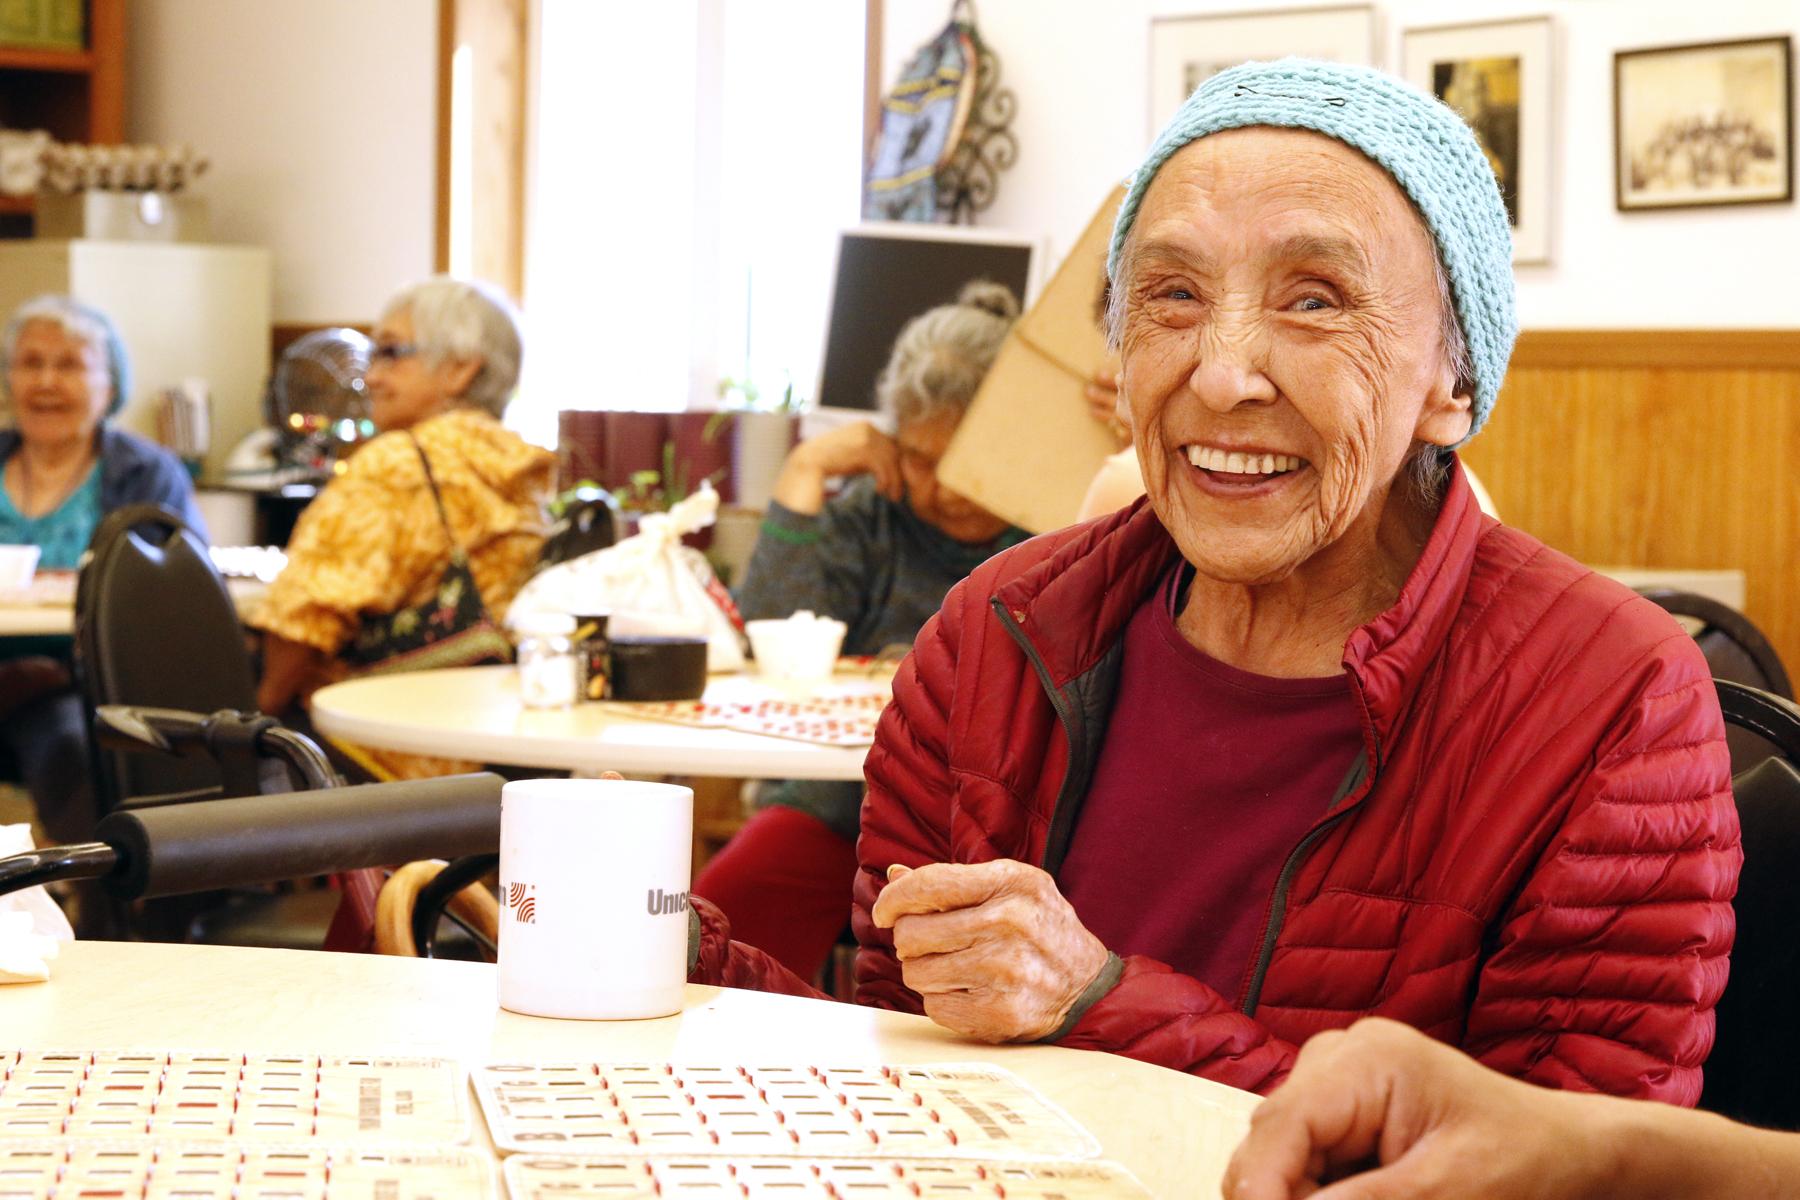 Catherine Peters, age 82, playing bingo at the ONC Senior Center. (Photo by Dean Swope, KYUK - Bethel)